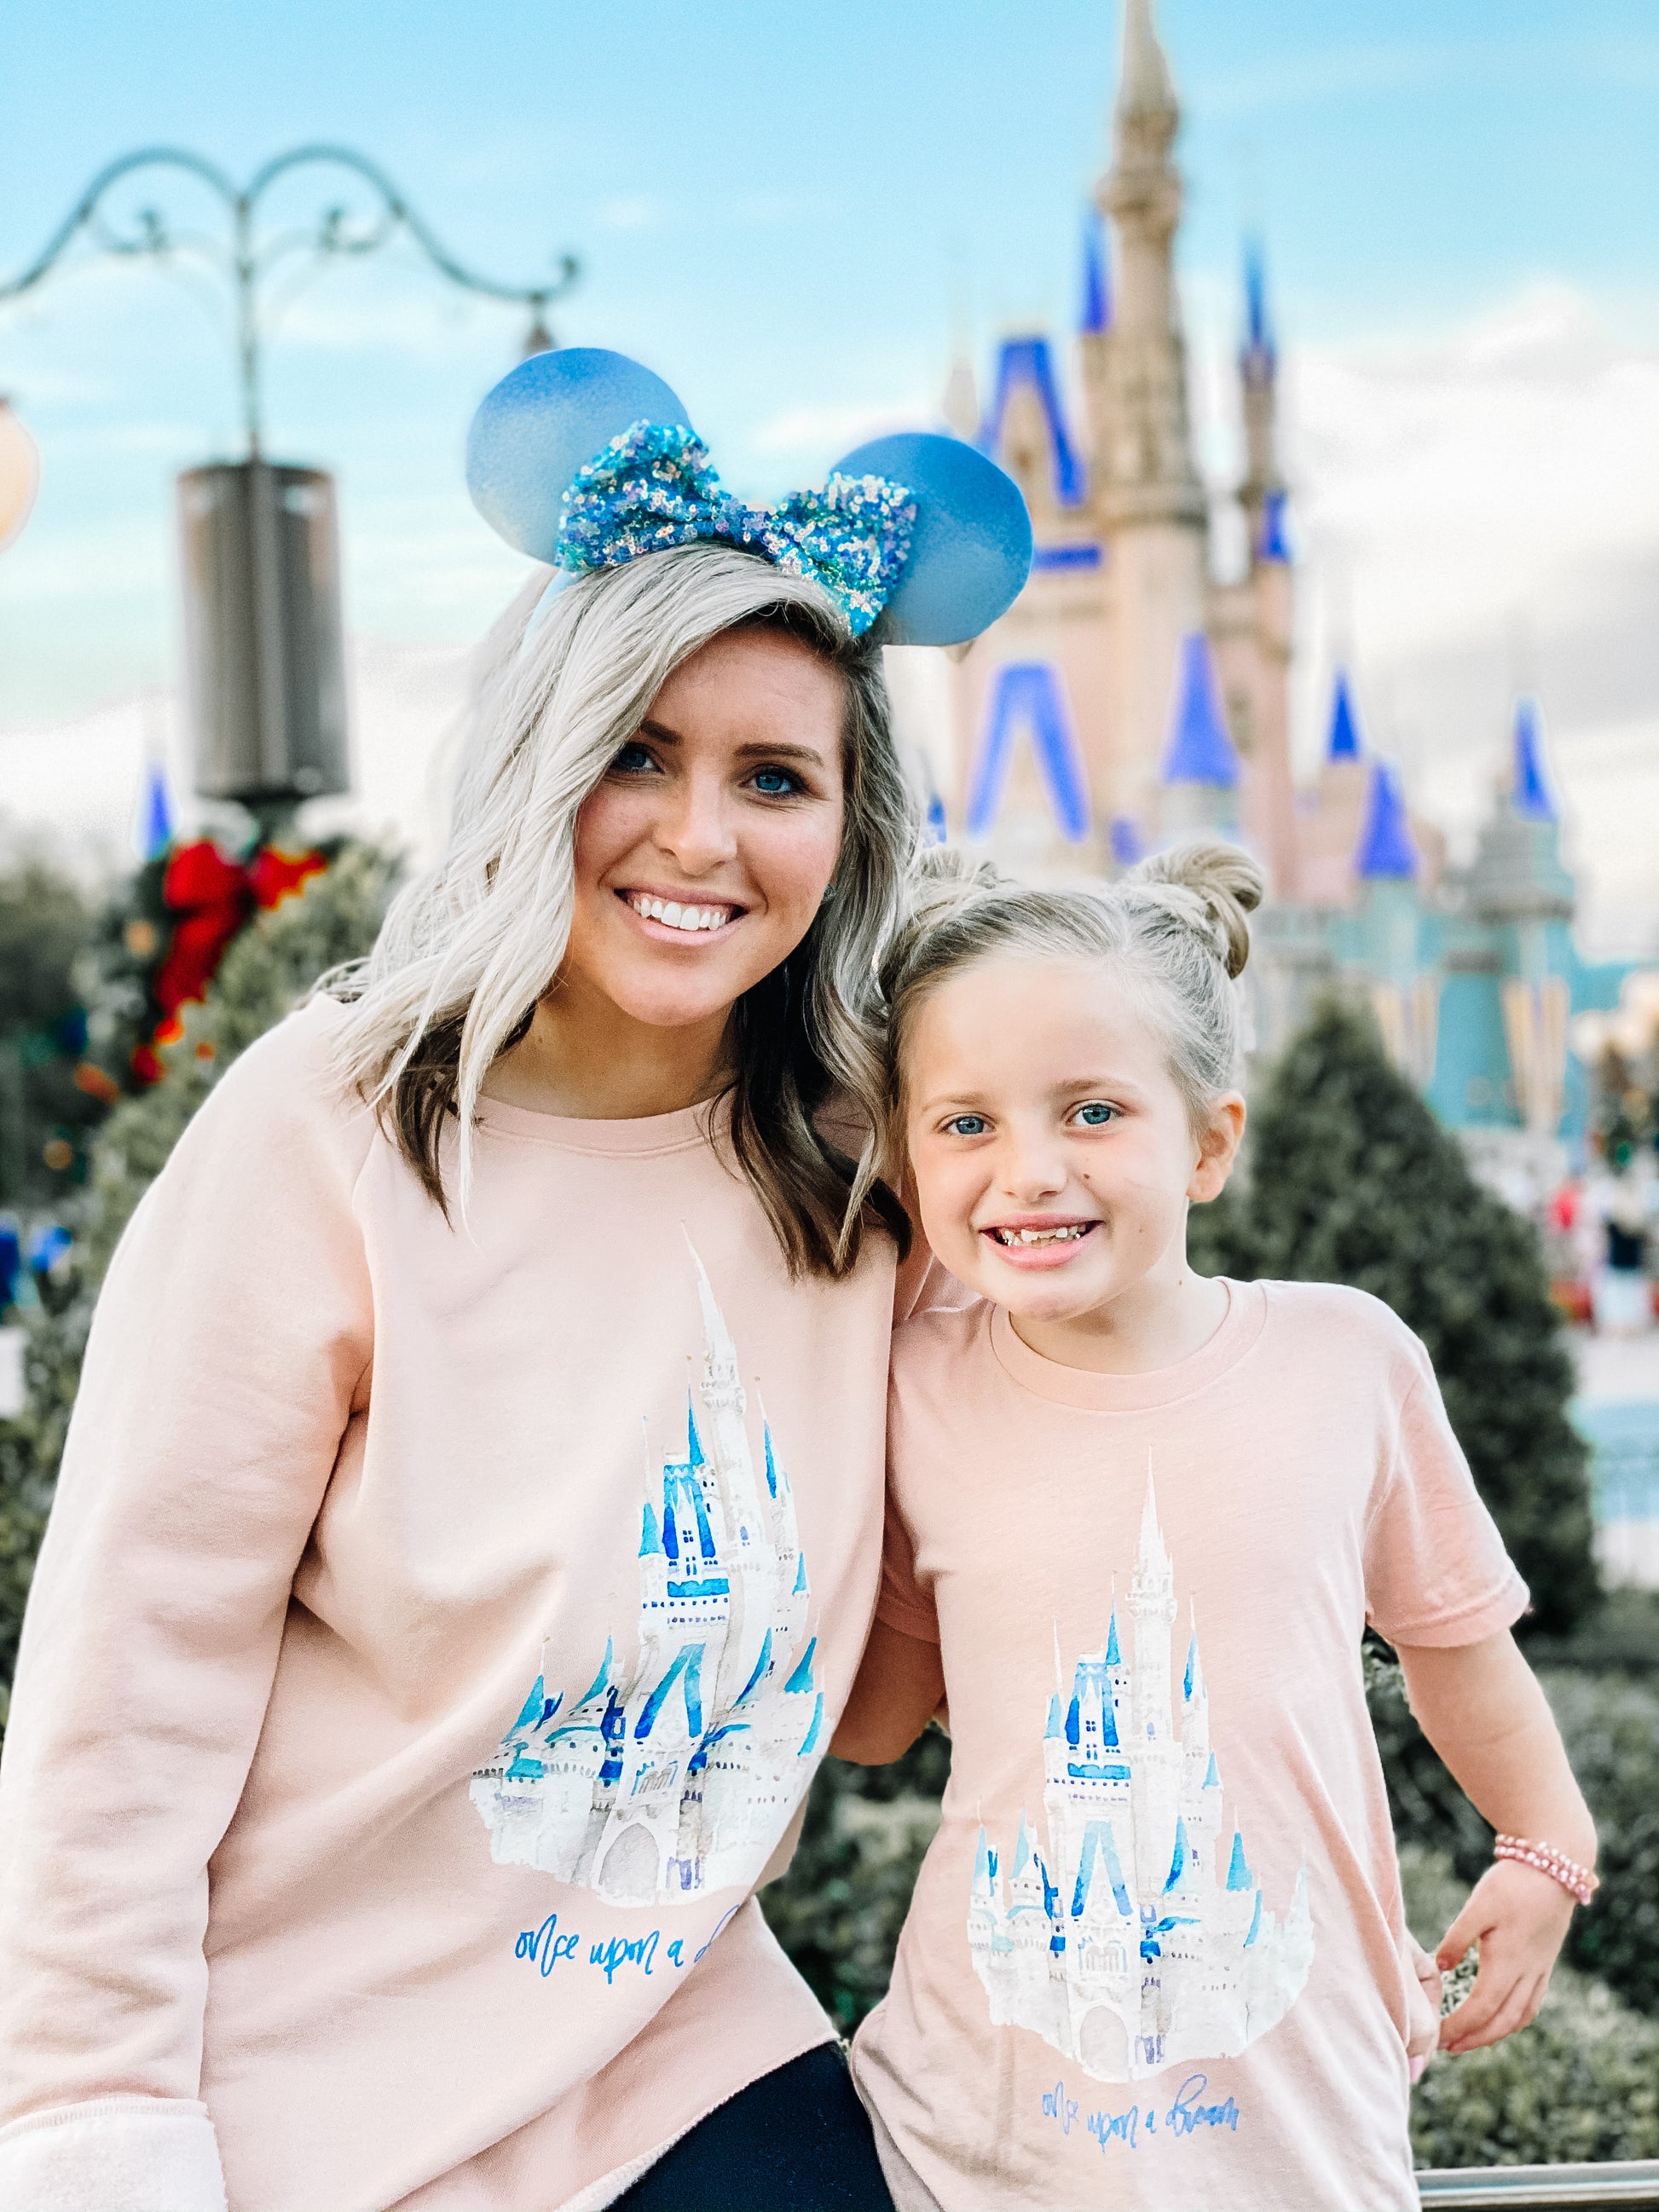 Once Upon A Dream | Pullover | Adult-Sister Shirts-Sister Shirts, Cute & Custom Tees for Mama & Littles in Trussville, Alabama.